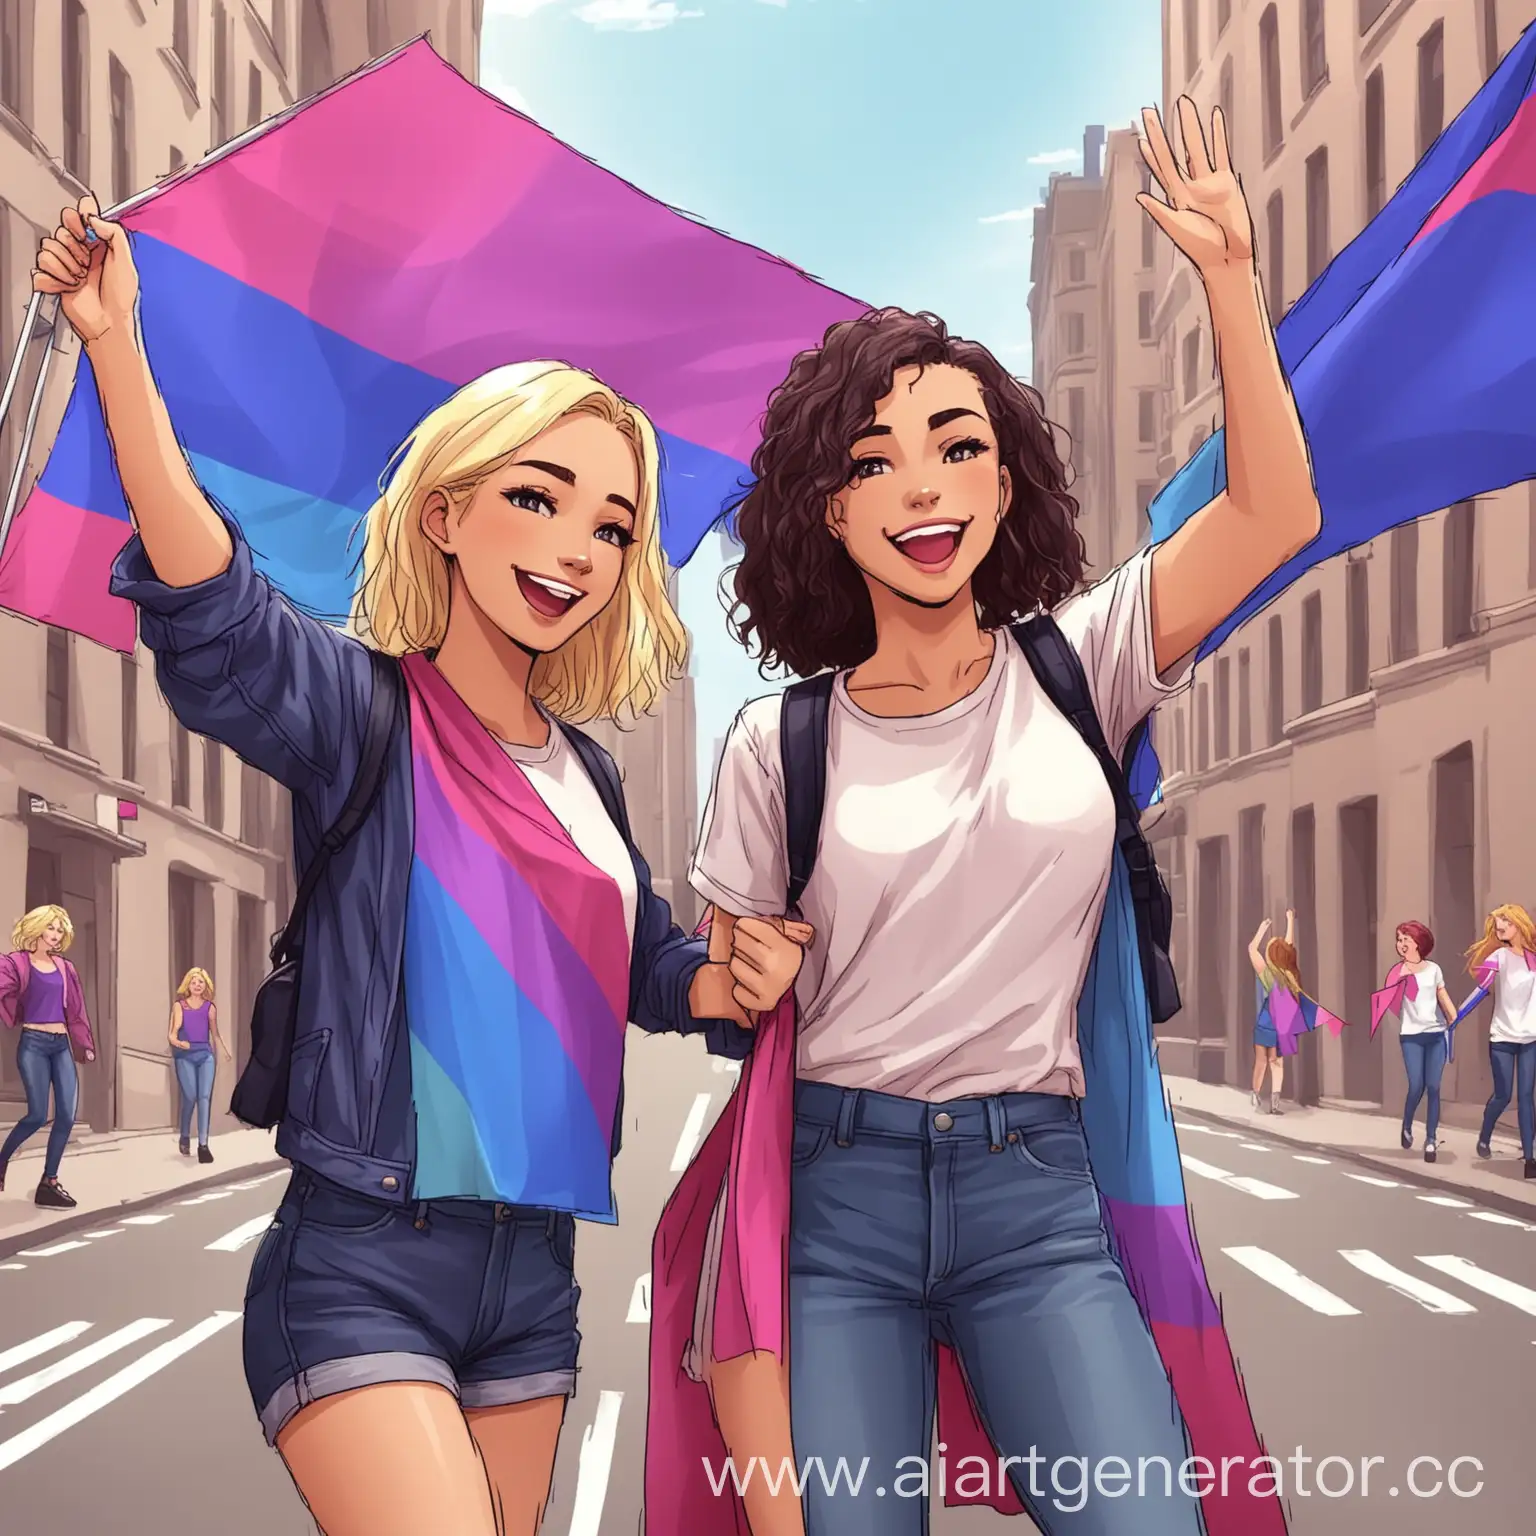 Two-Happy-Girls-Waving-Bisexual-Flags-in-Urban-Setting